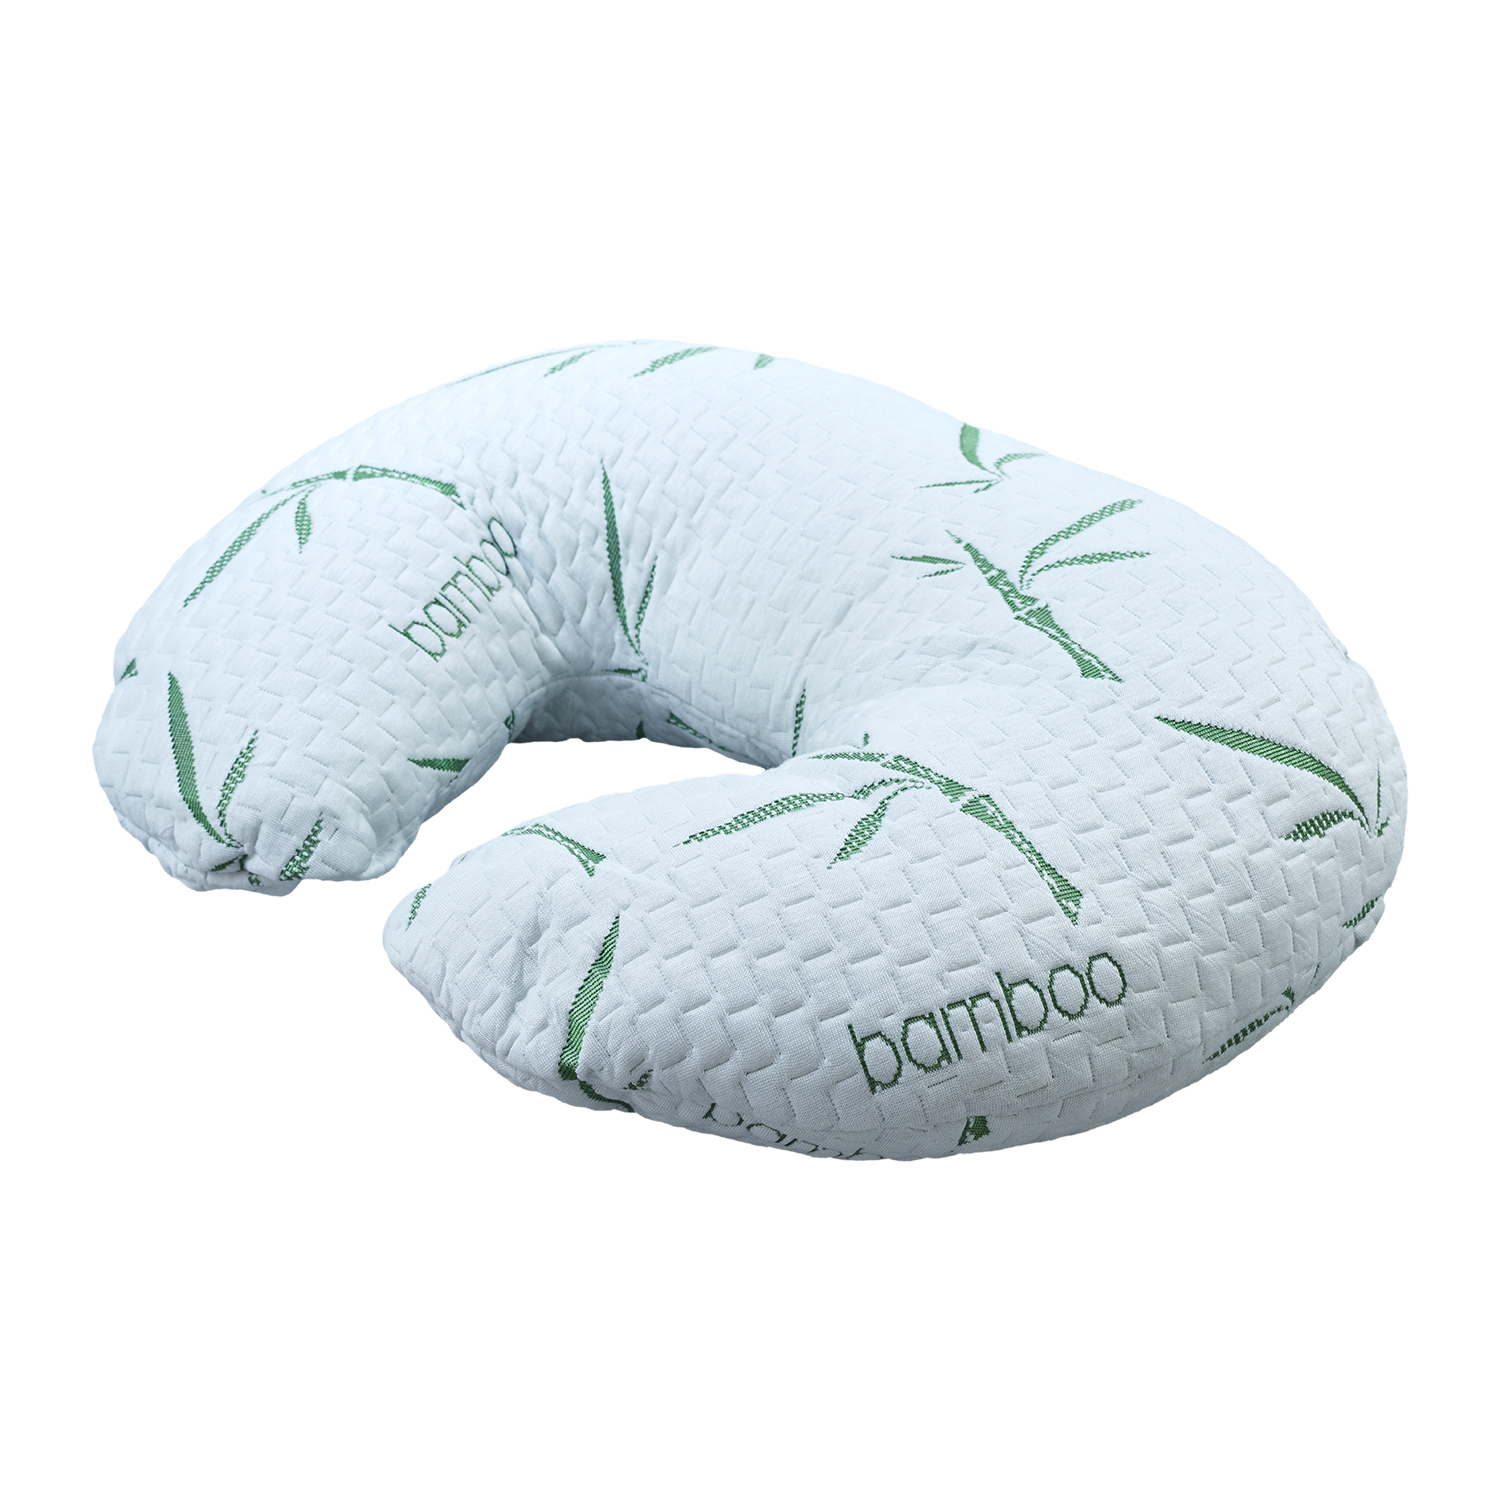 Nursing, Breastfeeding Baby Support Pillow, Newborn Infant Feeding Cushion | Portable for Travel | Nursing Pillow for Boys & Girls With Washable Zippered Bamboo Pillow Covered - image 1 of 10